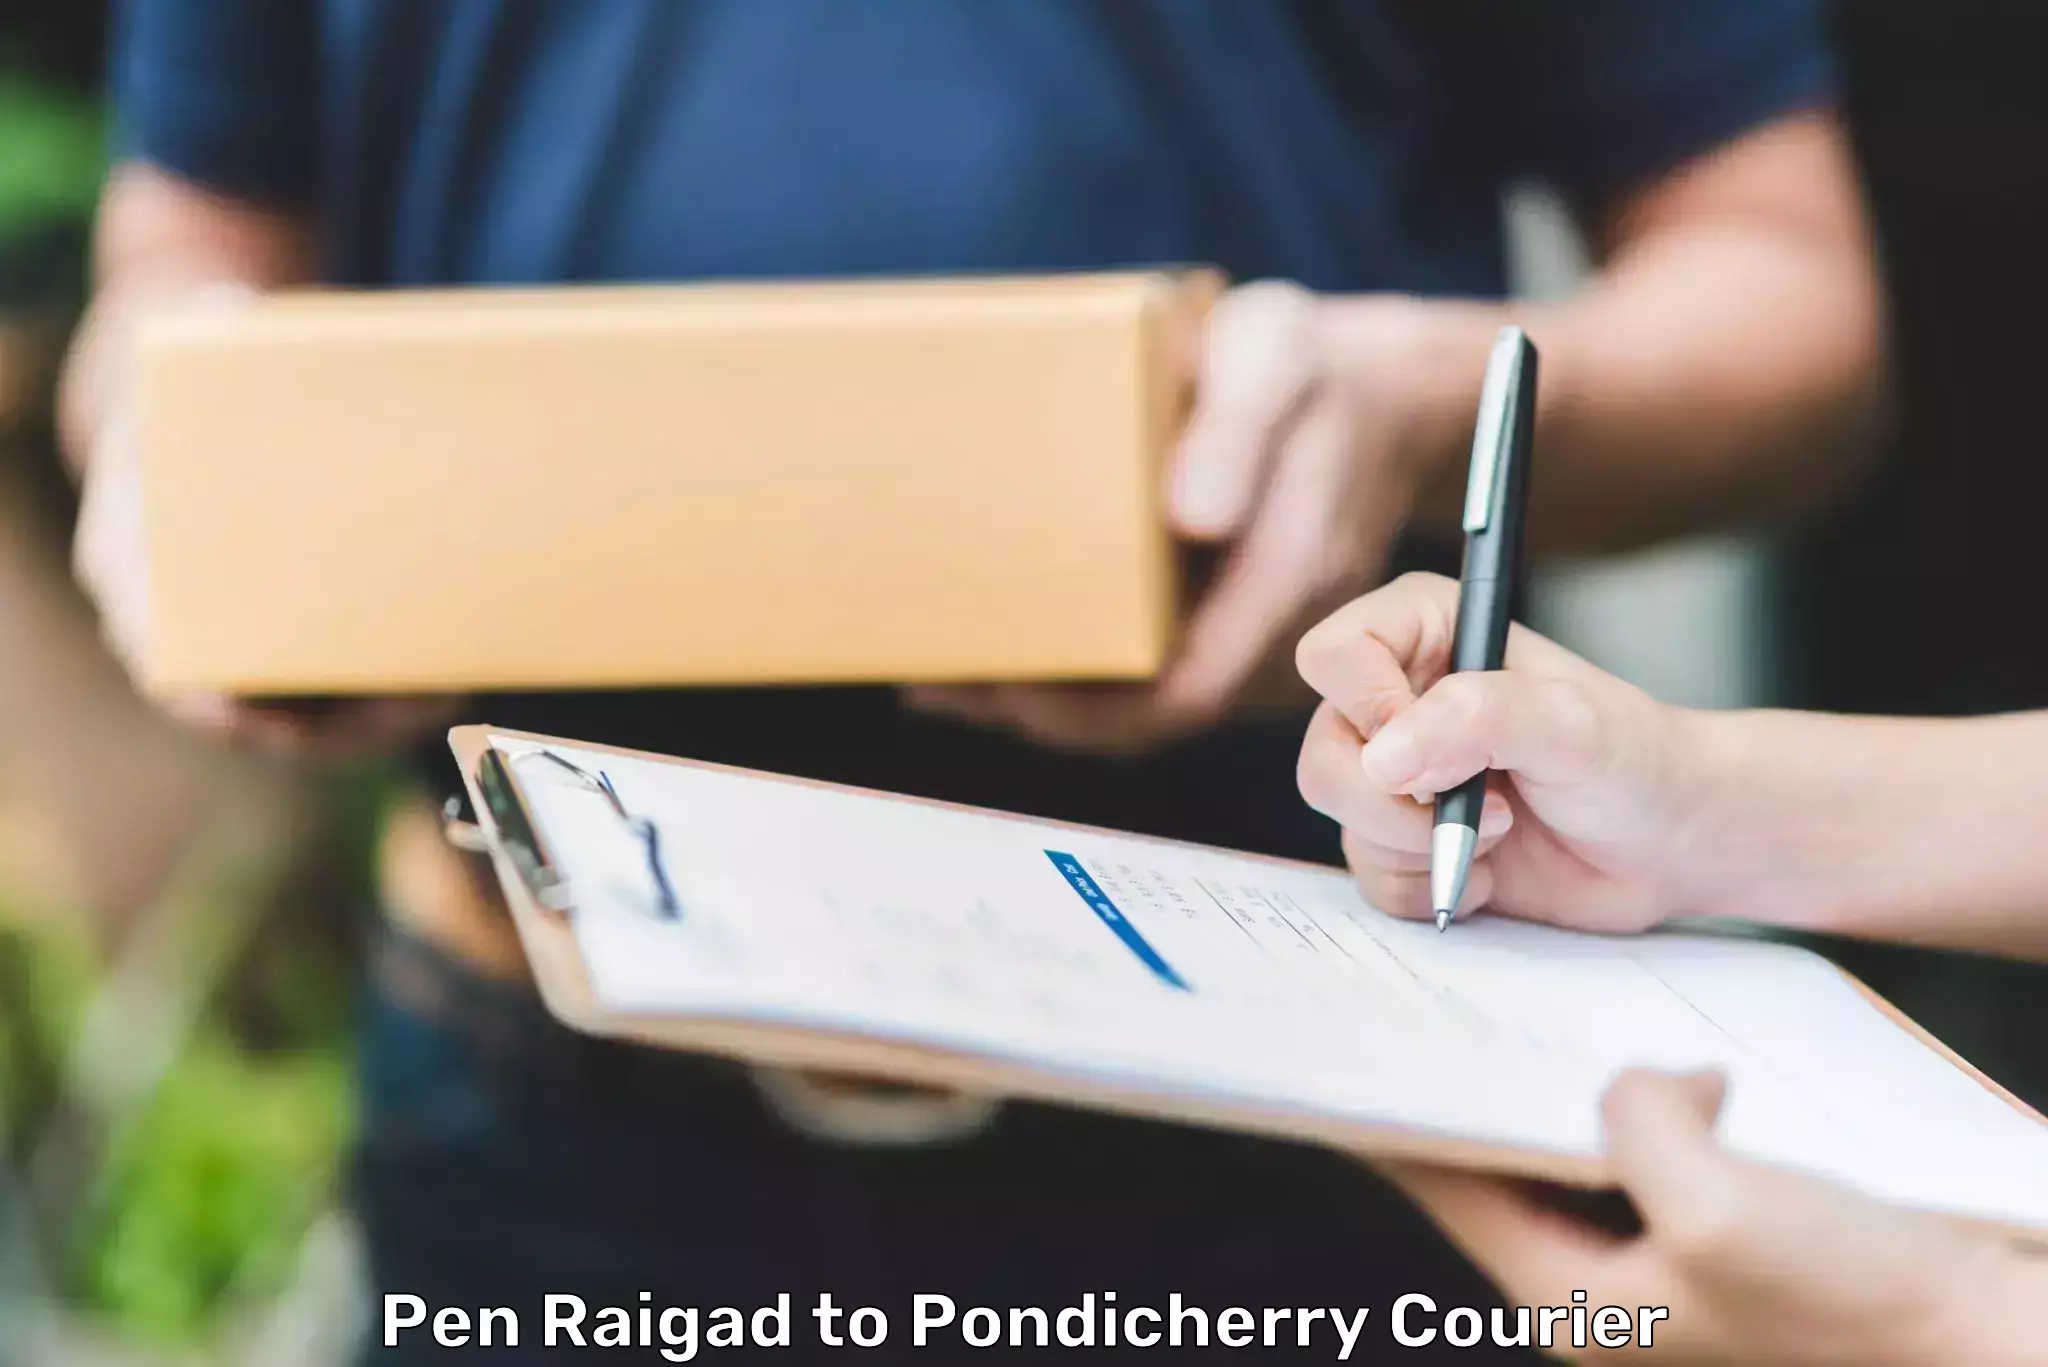 Express package services Pen Raigad to Pondicherry